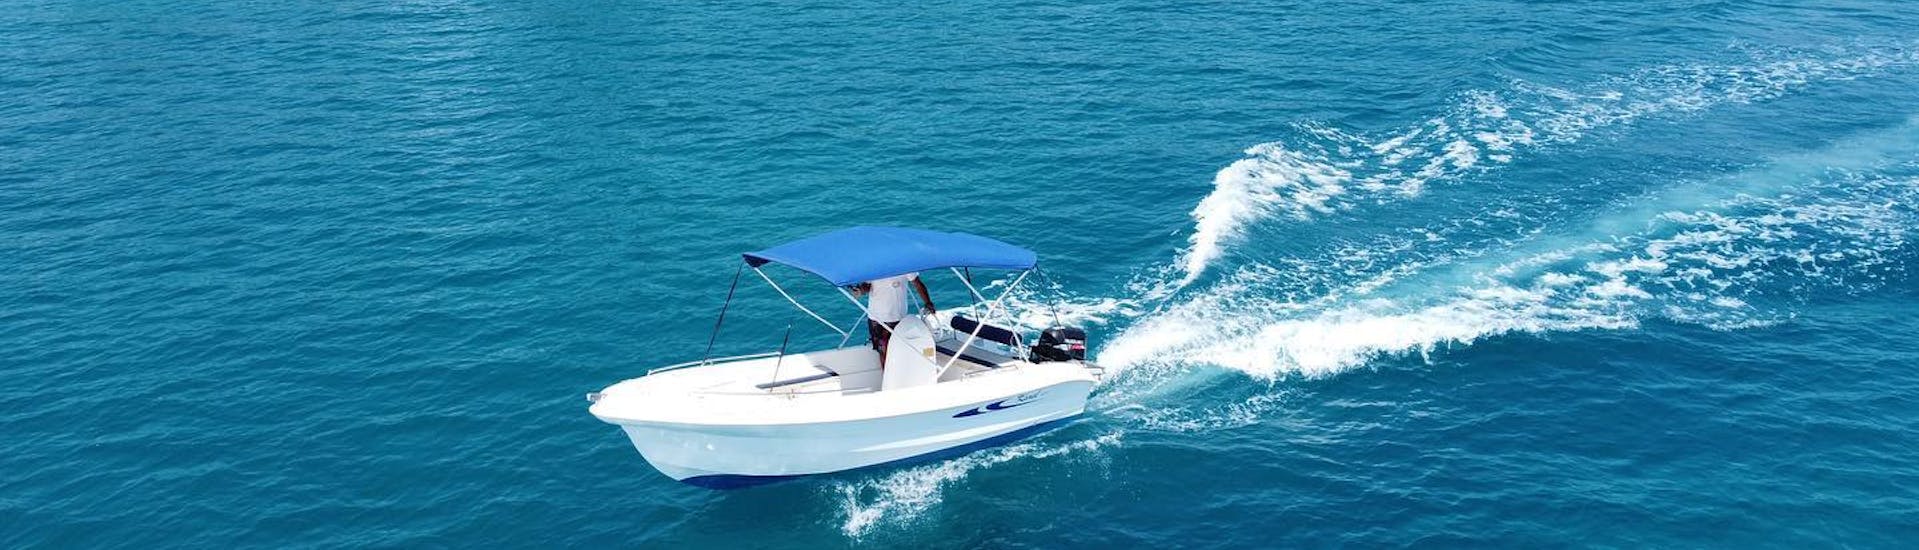 The boat is navigating on the crystal clear waters during the Boat Rental in Agios Nikolaos (up to 5 people) without Licence with Amoudi Watersports.